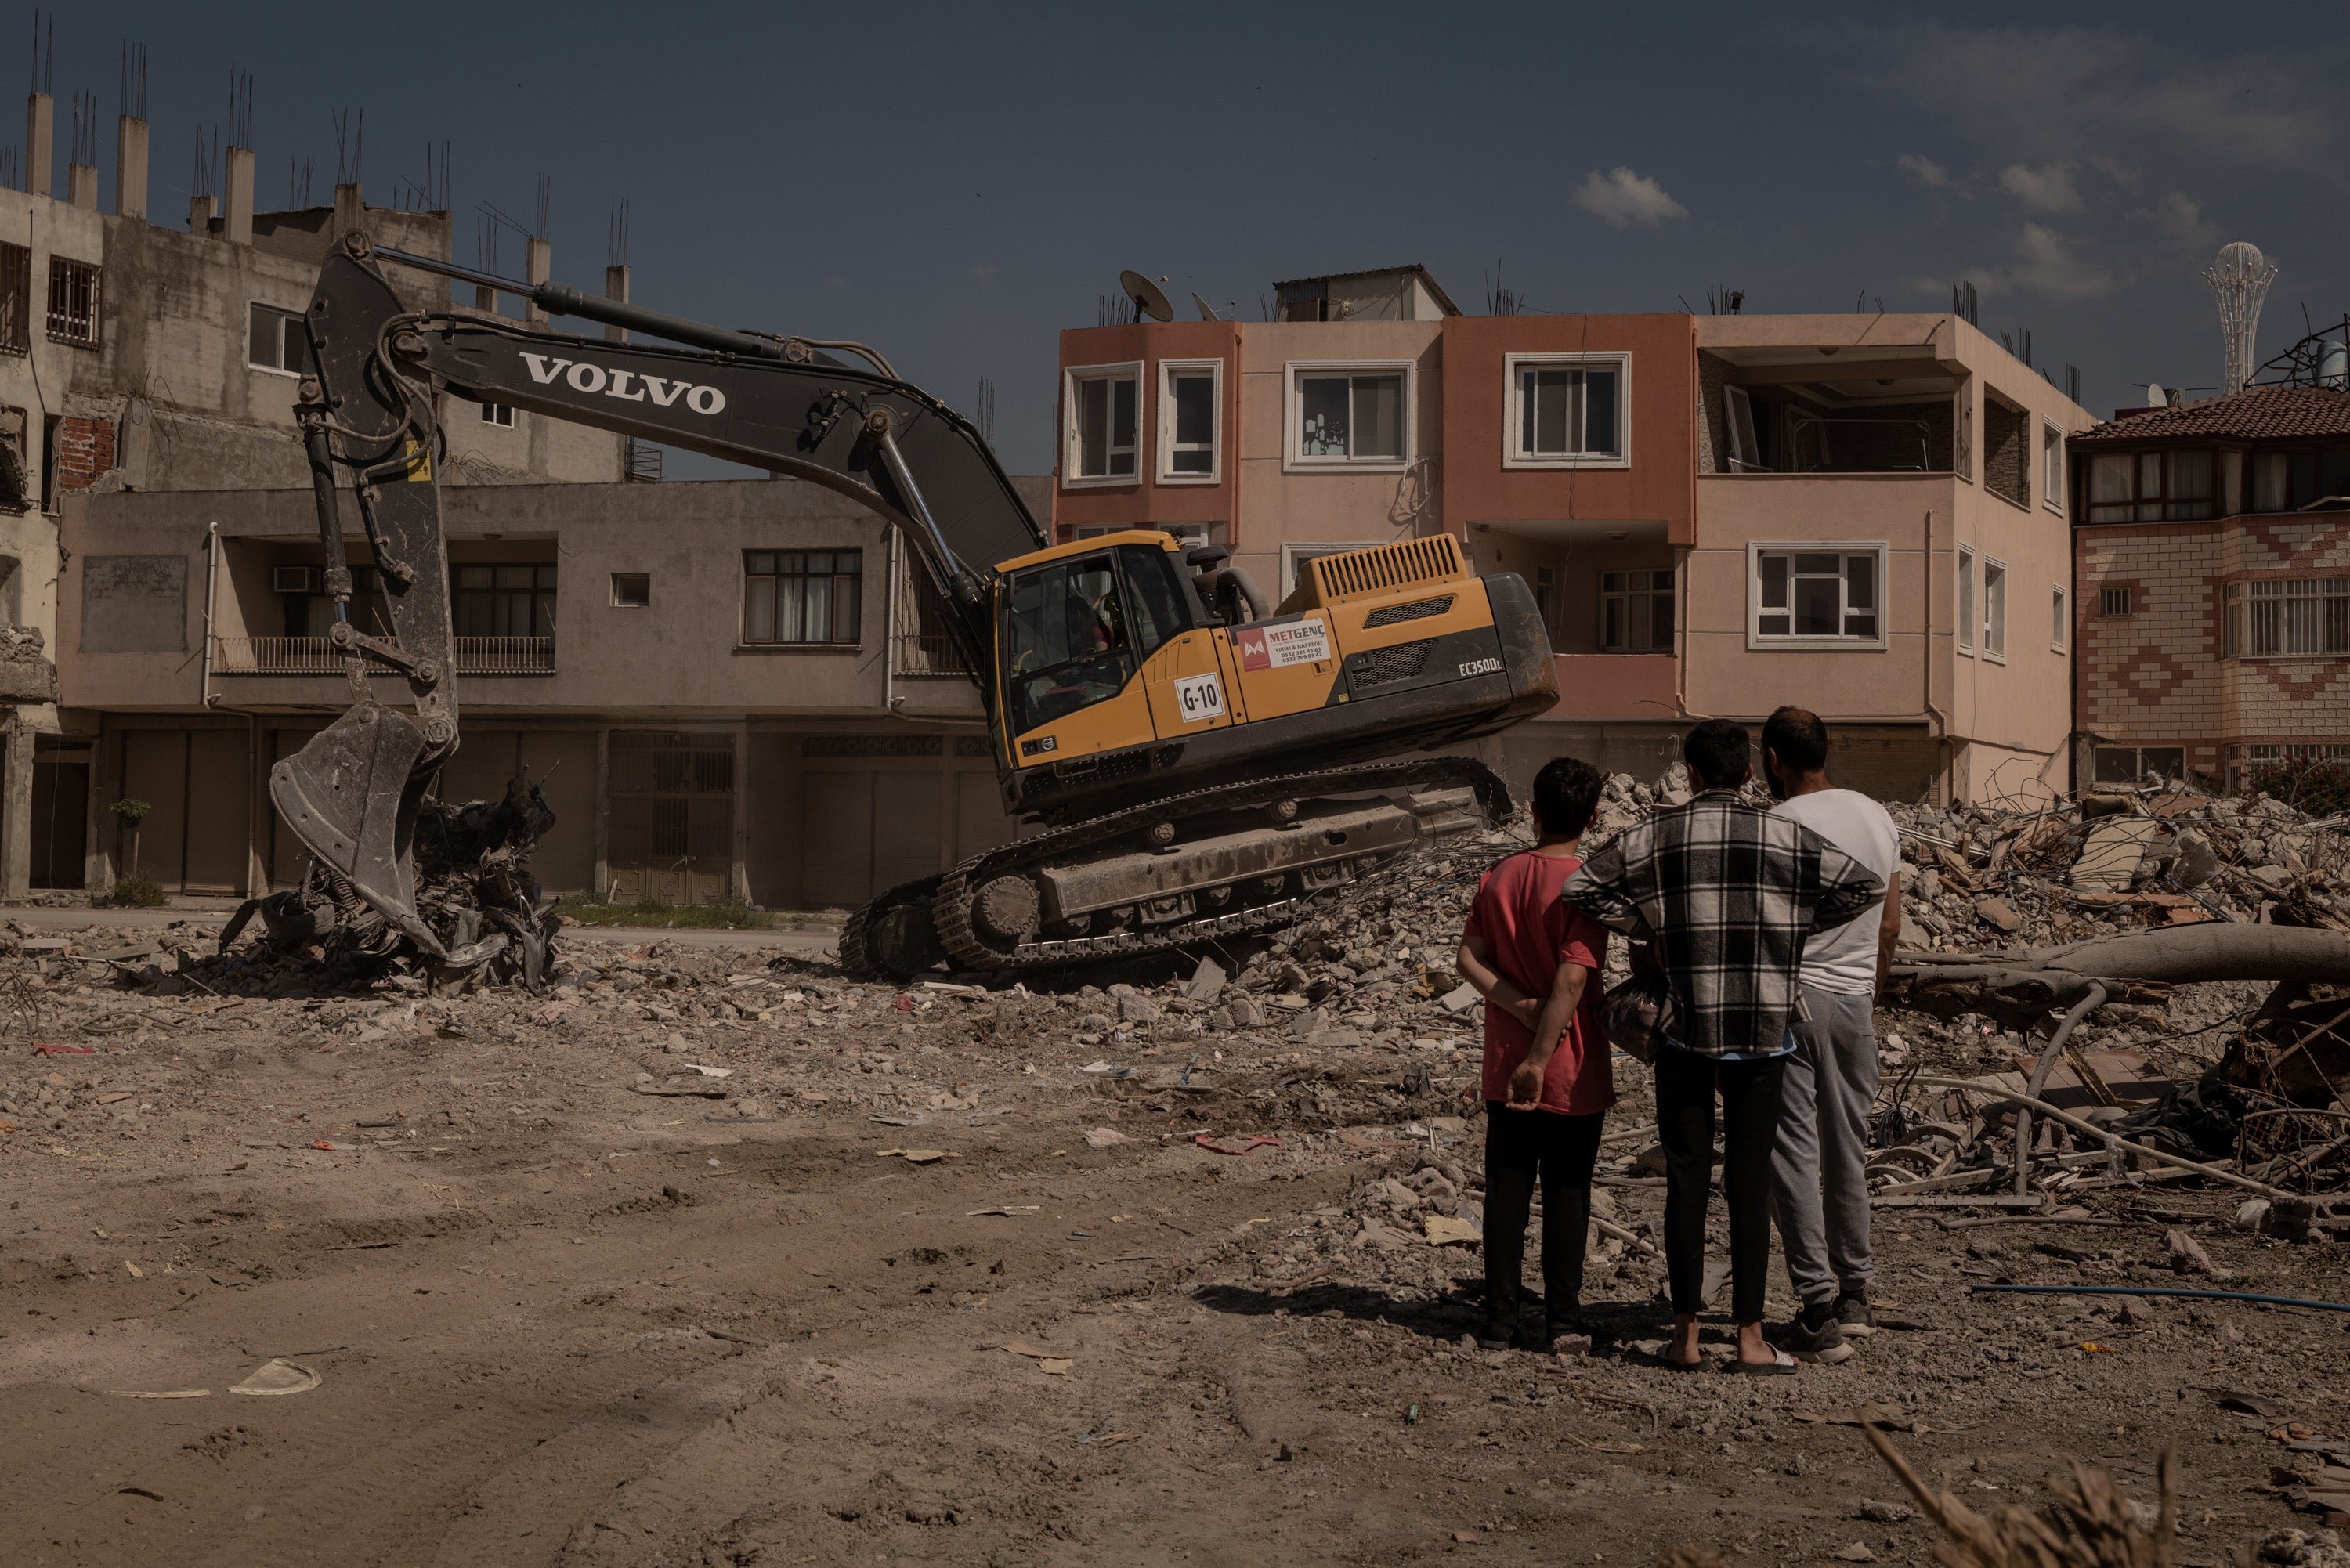 Residents of a building in Samandag that was demolished watch as the rubble is sorted and removed